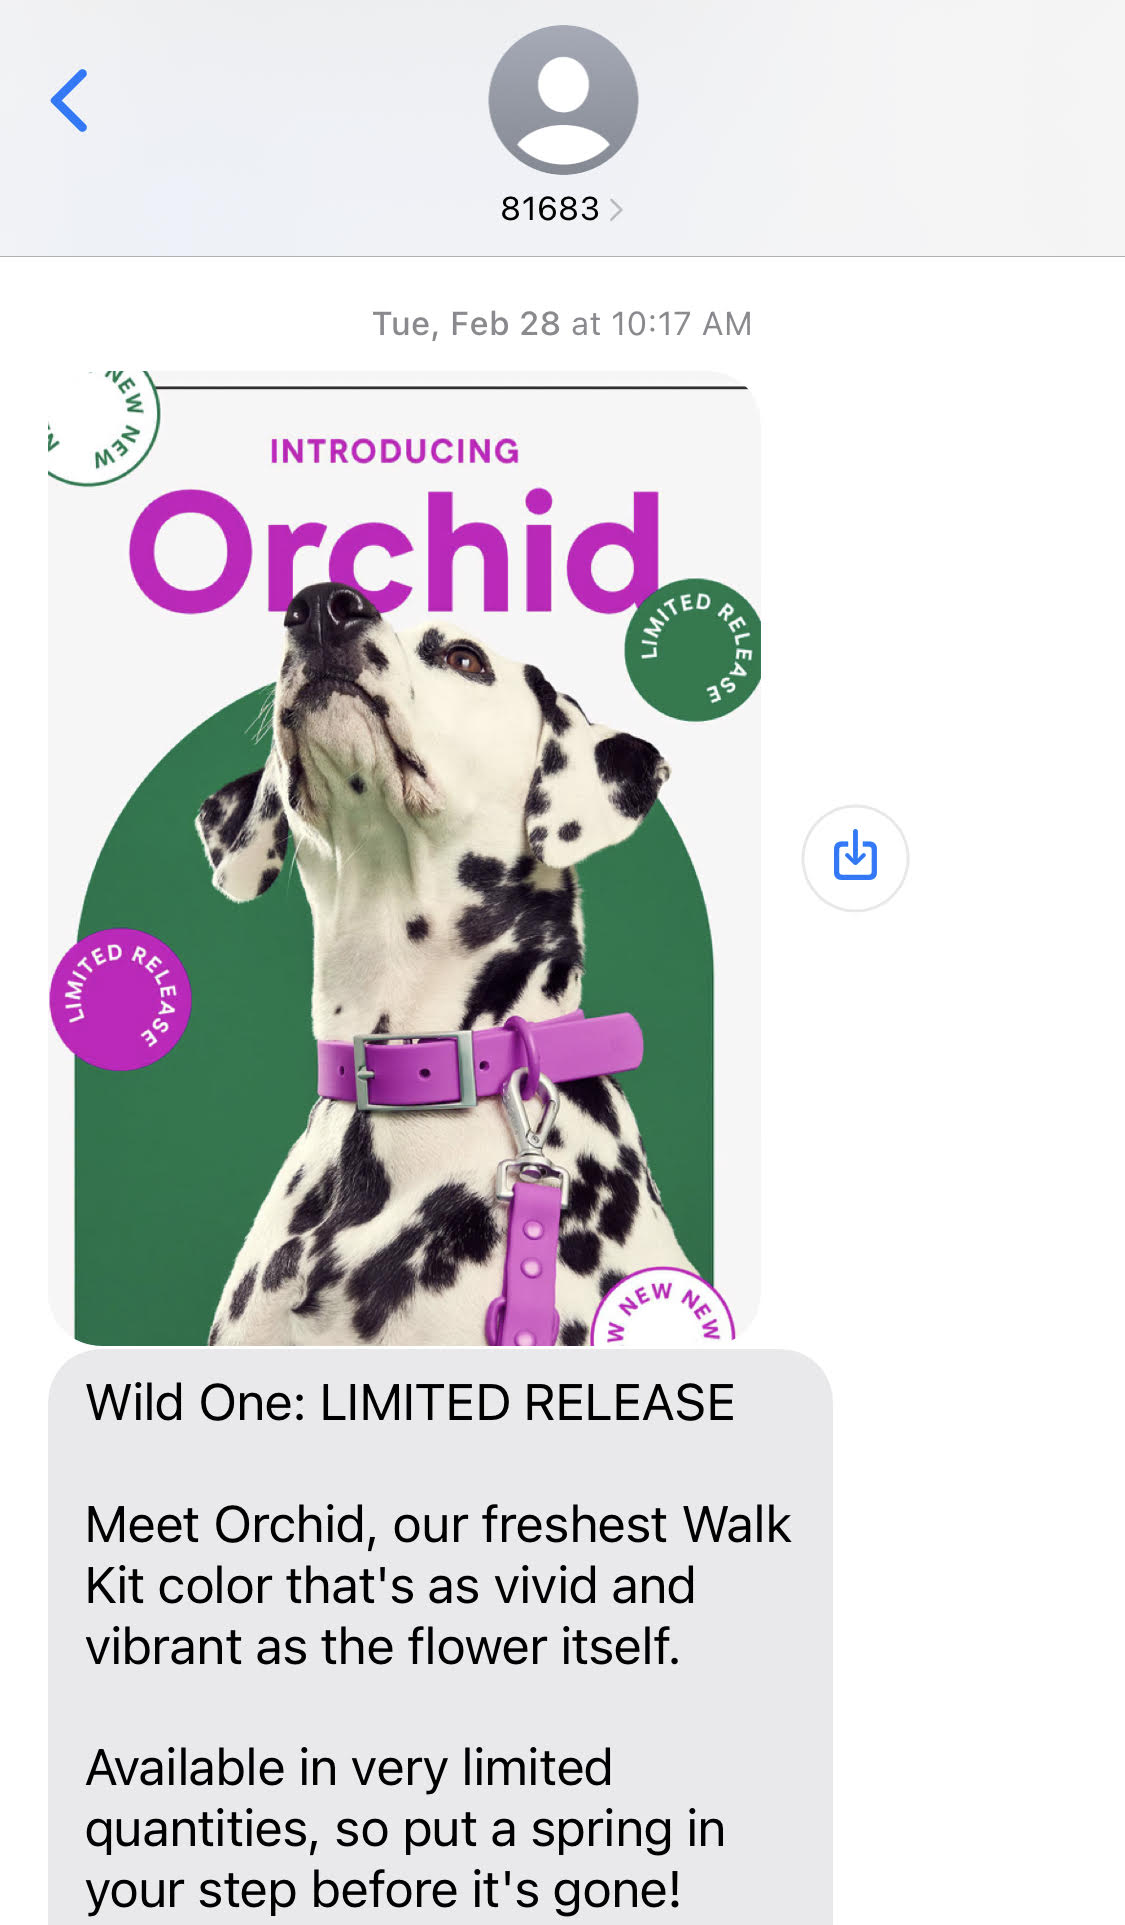 Wild One adds images to their SMS